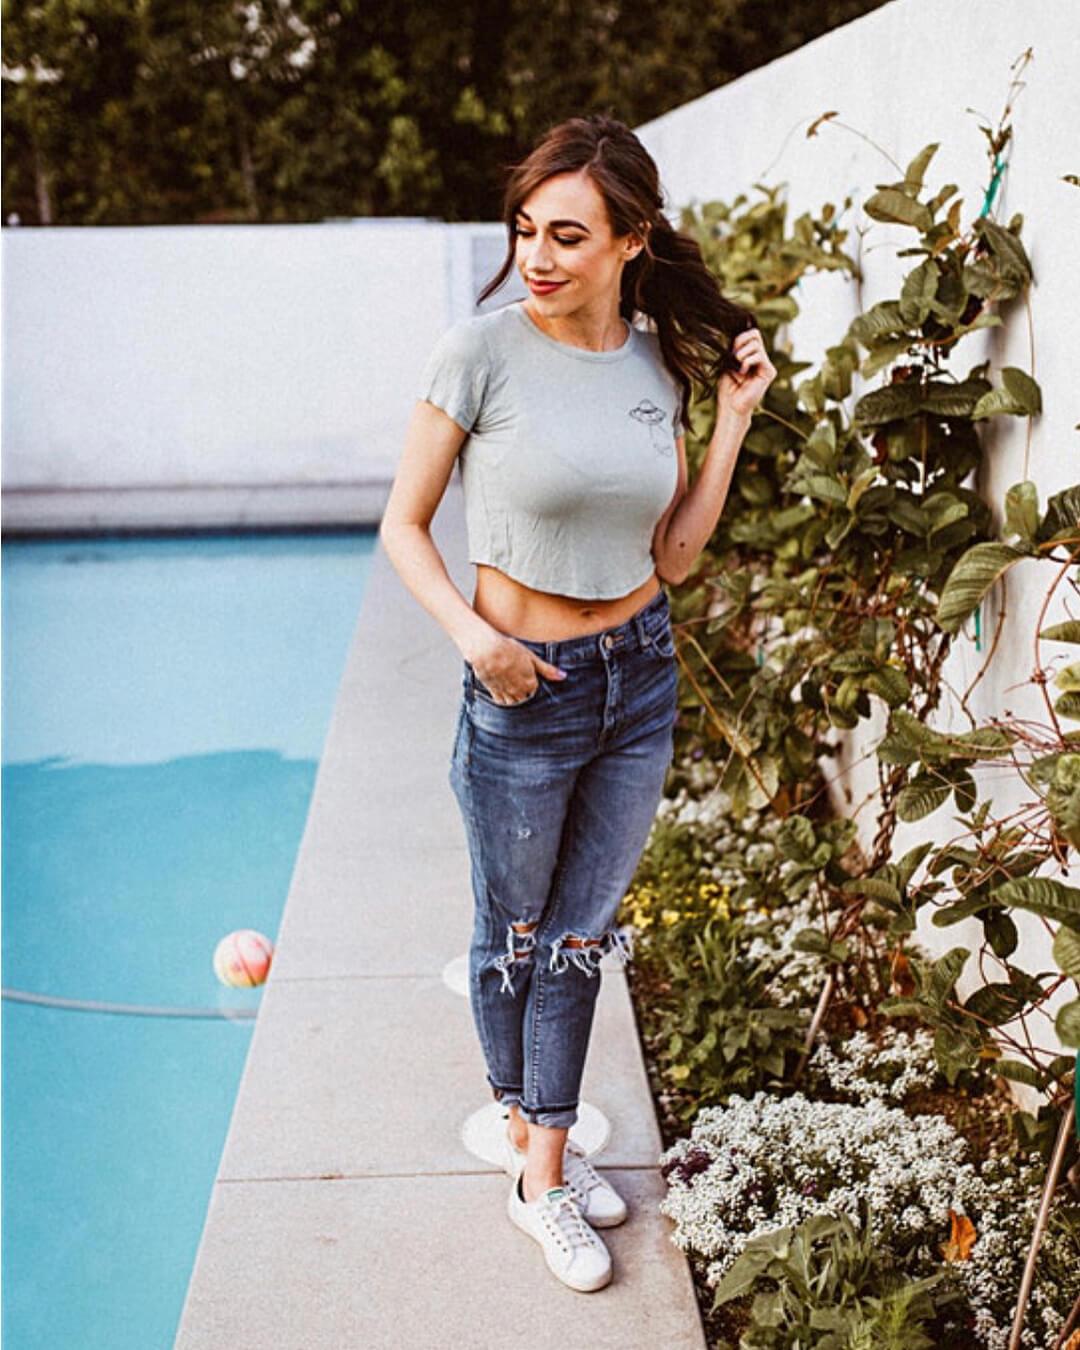 46 Hot Pictures Of Colleen Ballinger Will Hypnotise You With Her Exquisite Body | Best Of Comic Books